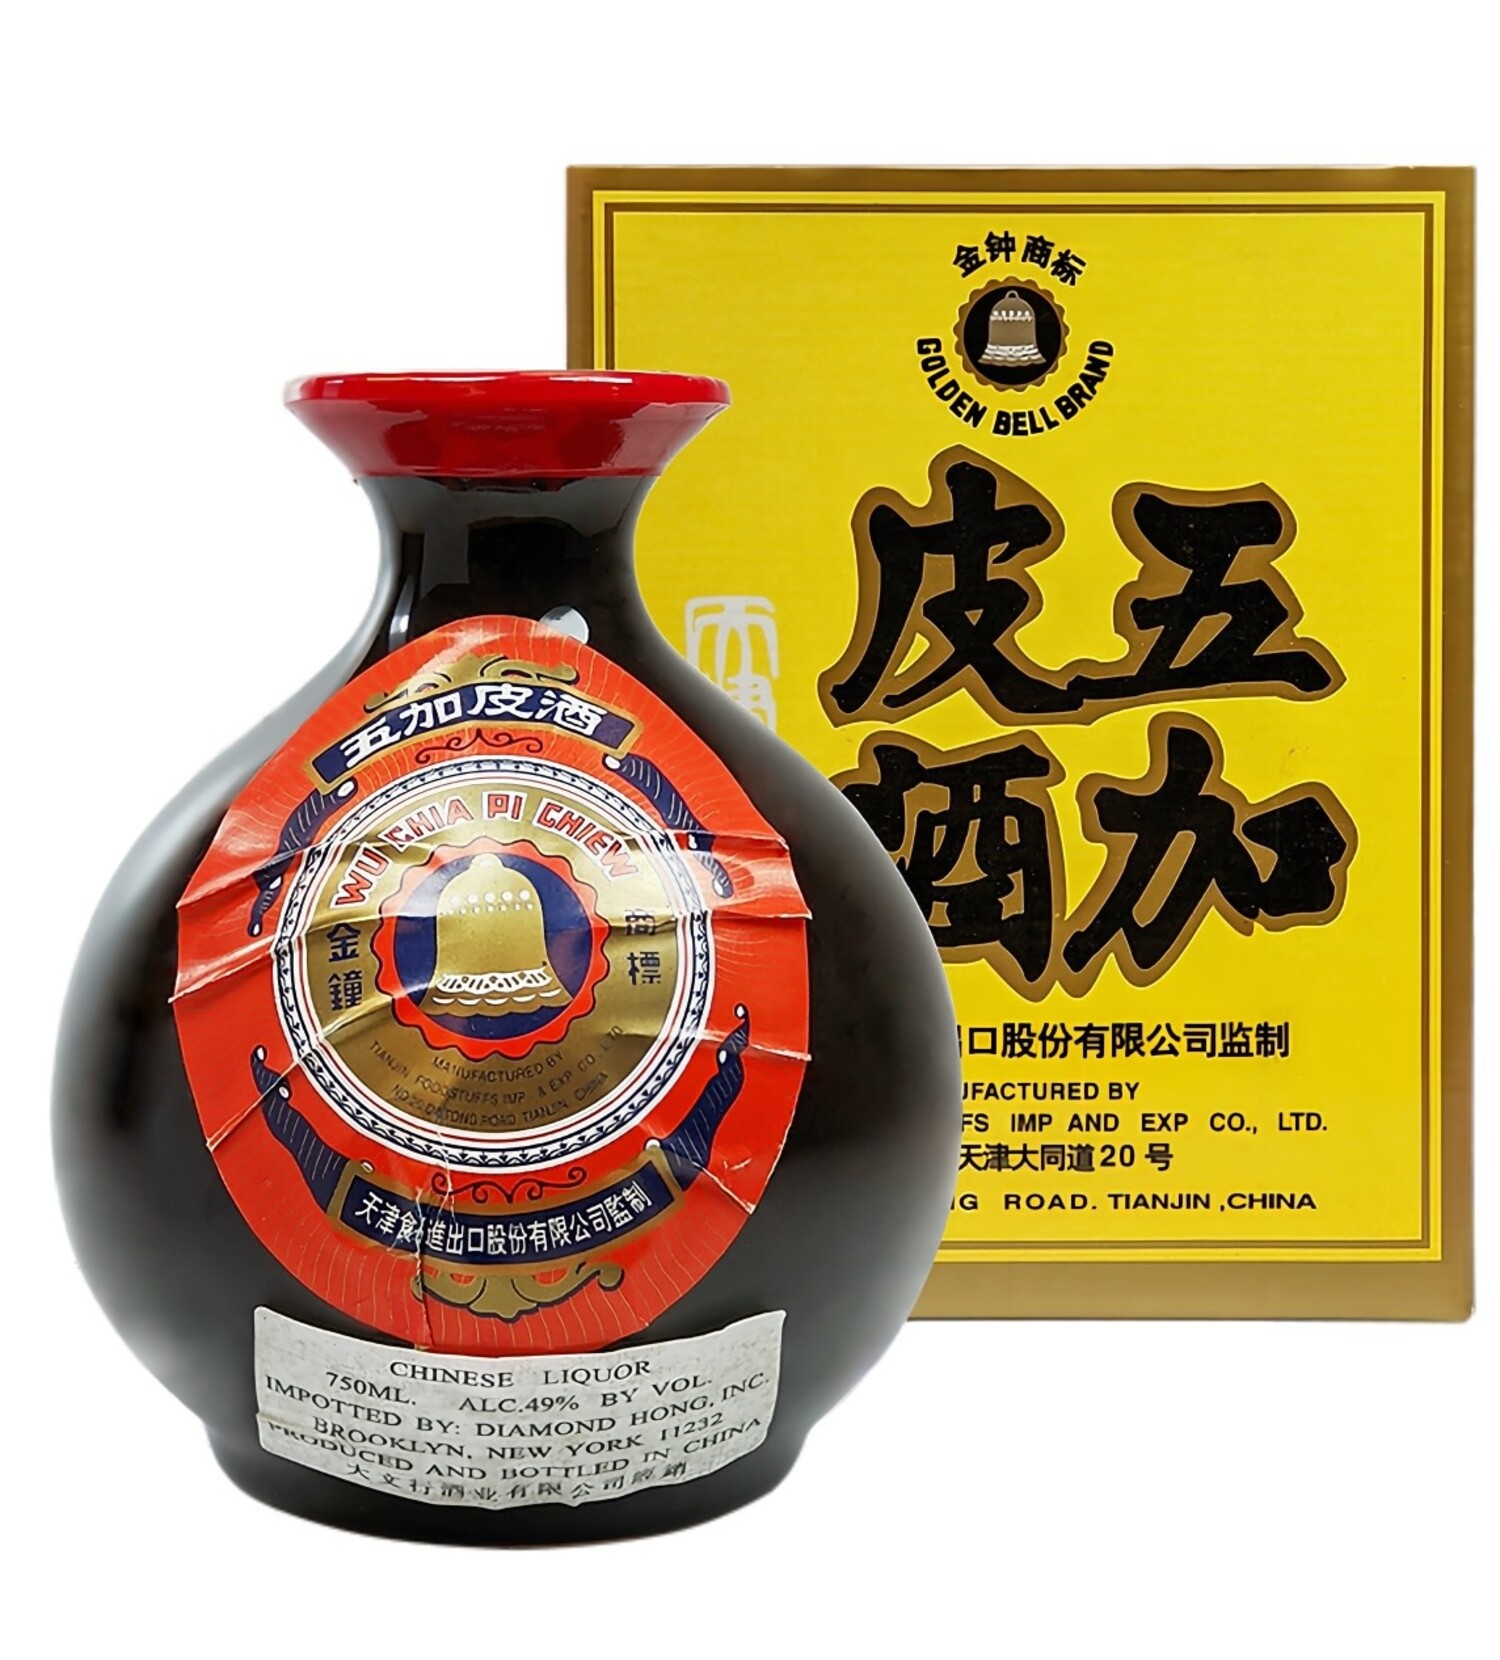 Golden Bell Wu Chia Pi Chiew 金钟天津五加皮酒瓷瓶$28 - Uncle 